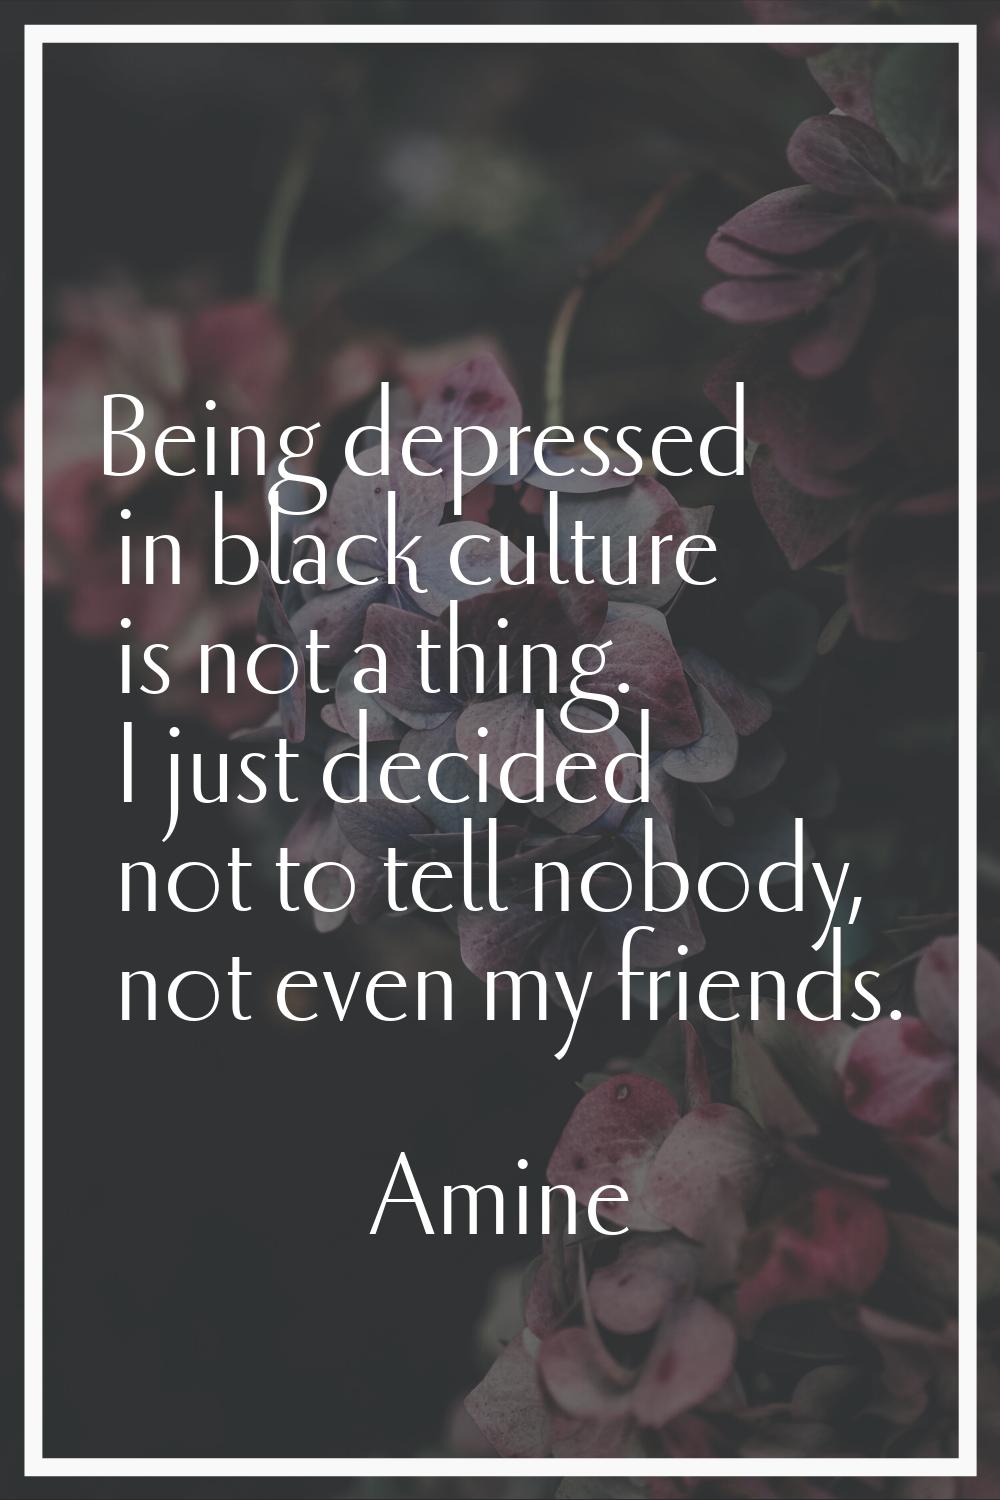 Being depressed in black culture is not a thing. I just decided not to tell nobody, not even my fri